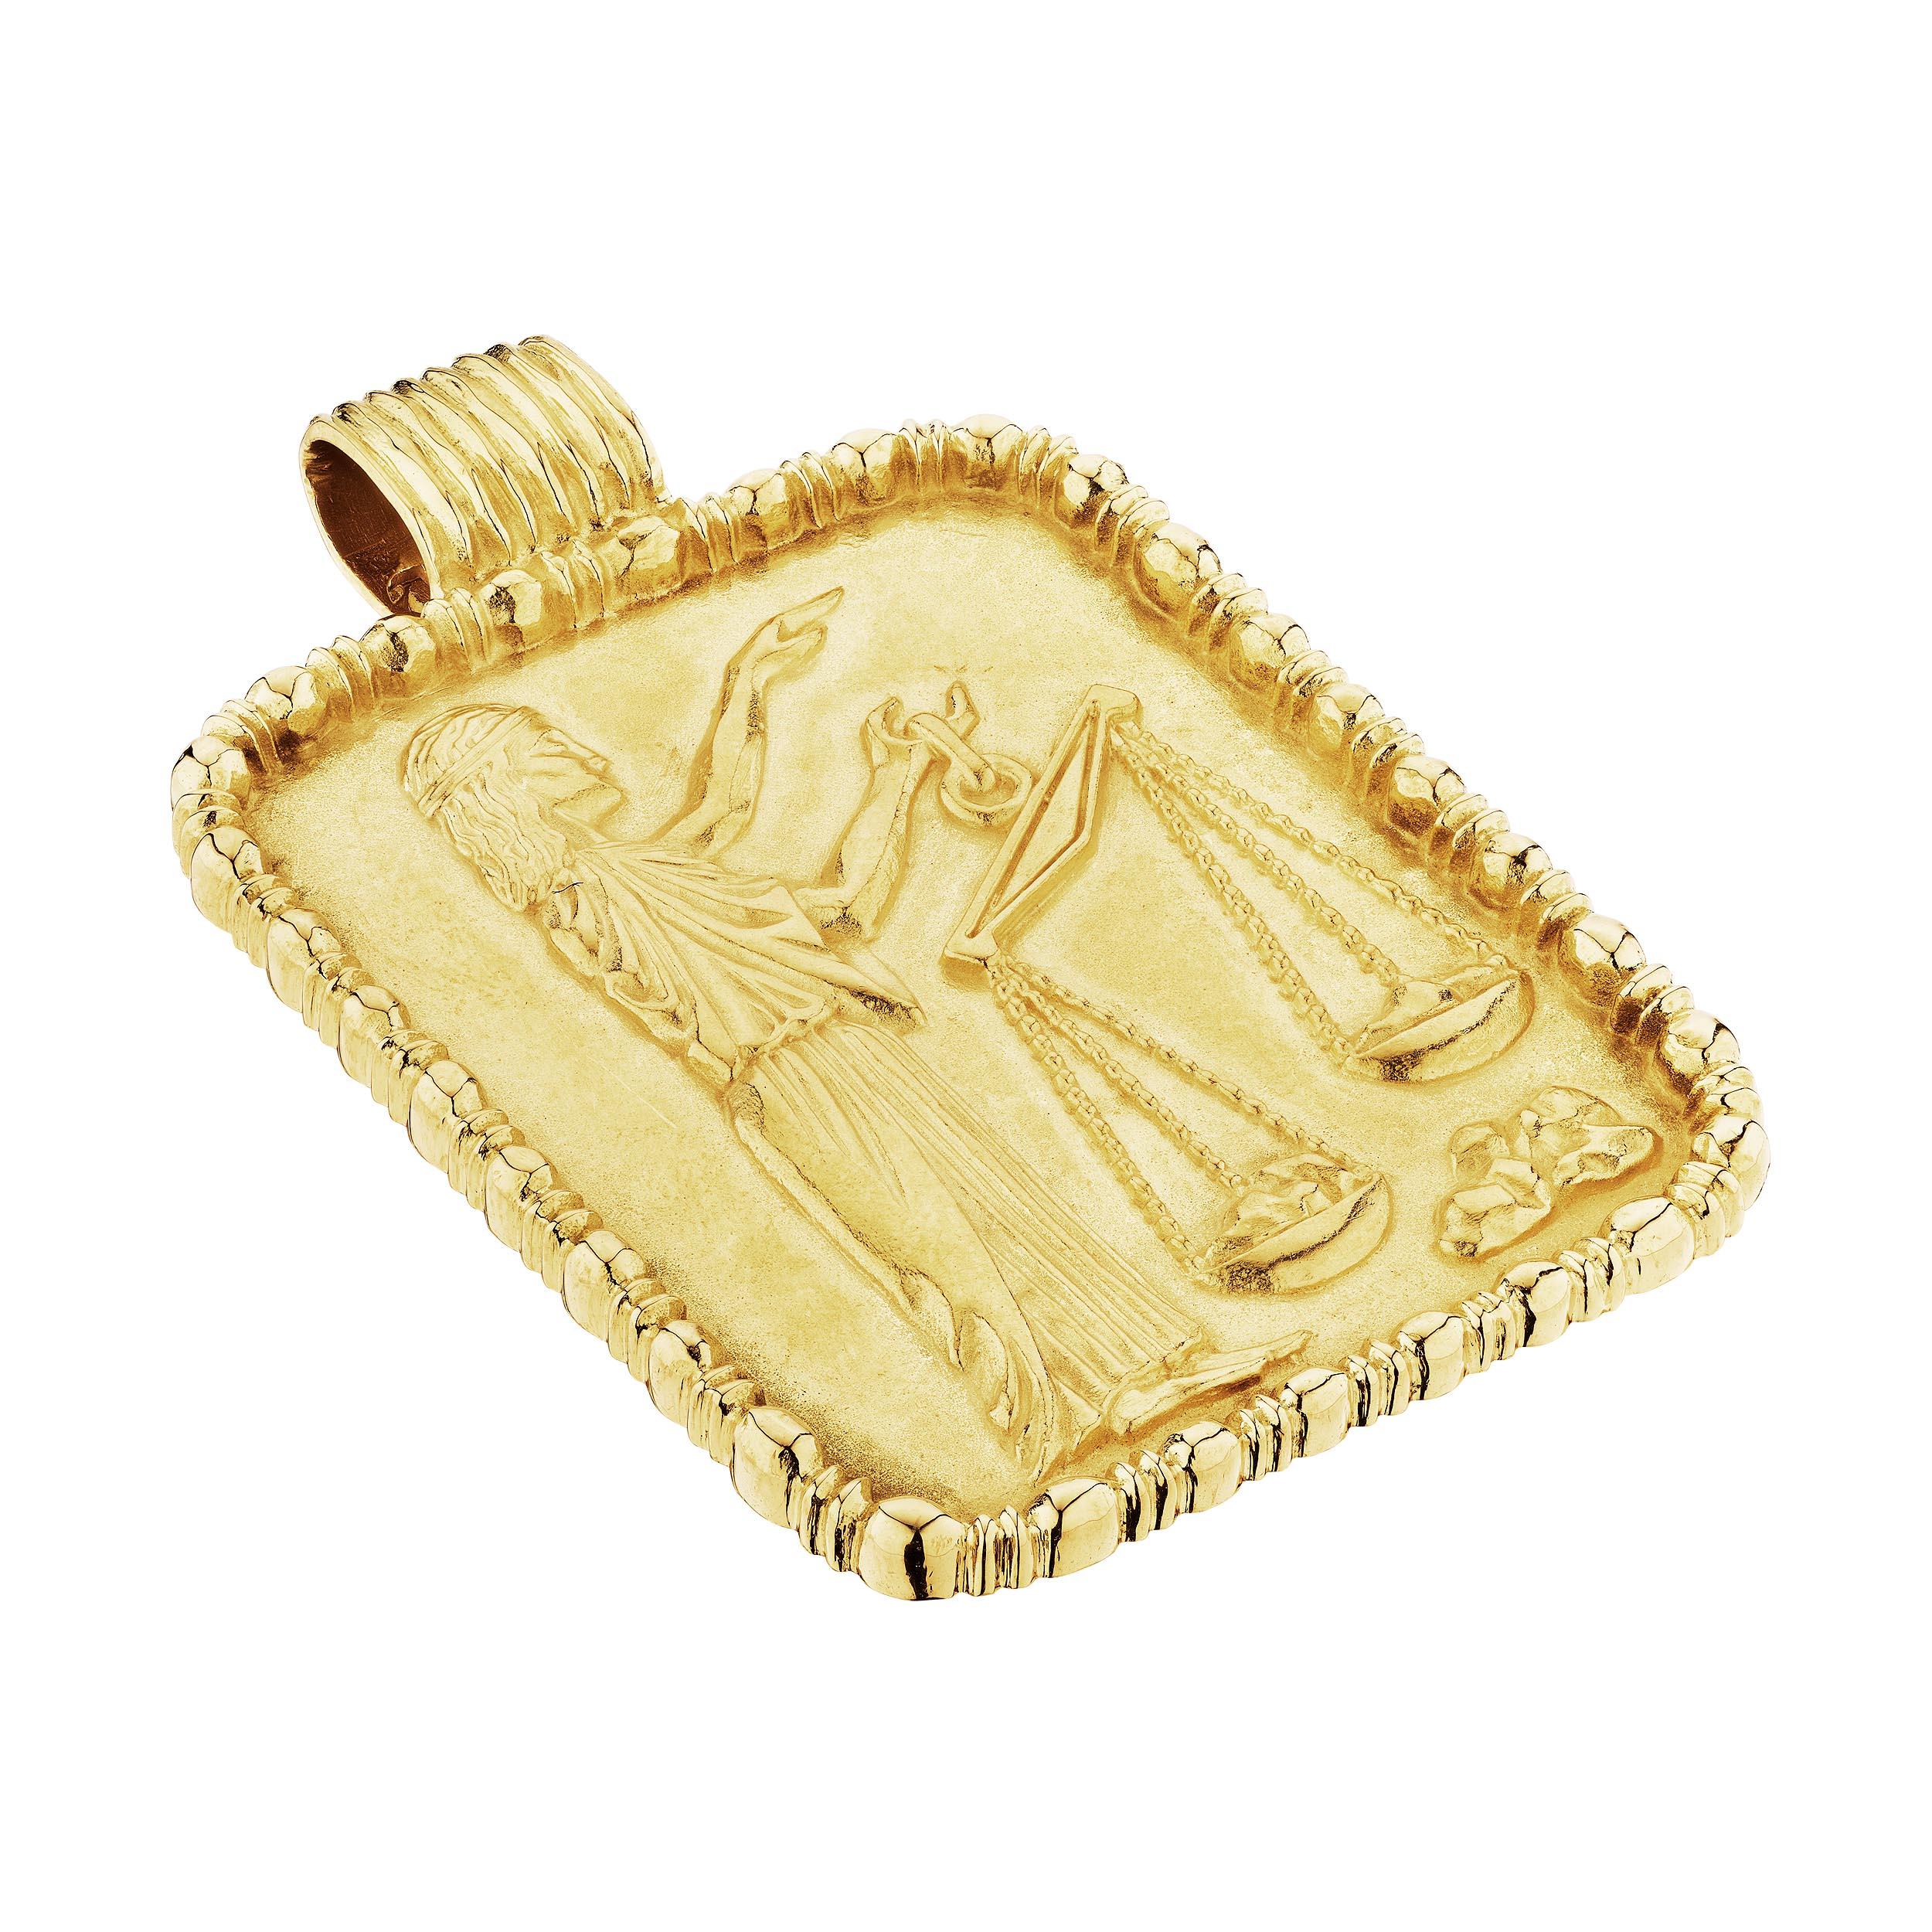 Fred Paris Libra Zodiac Modernist Gold Pendant In Excellent Condition For Sale In Greenwich, CT